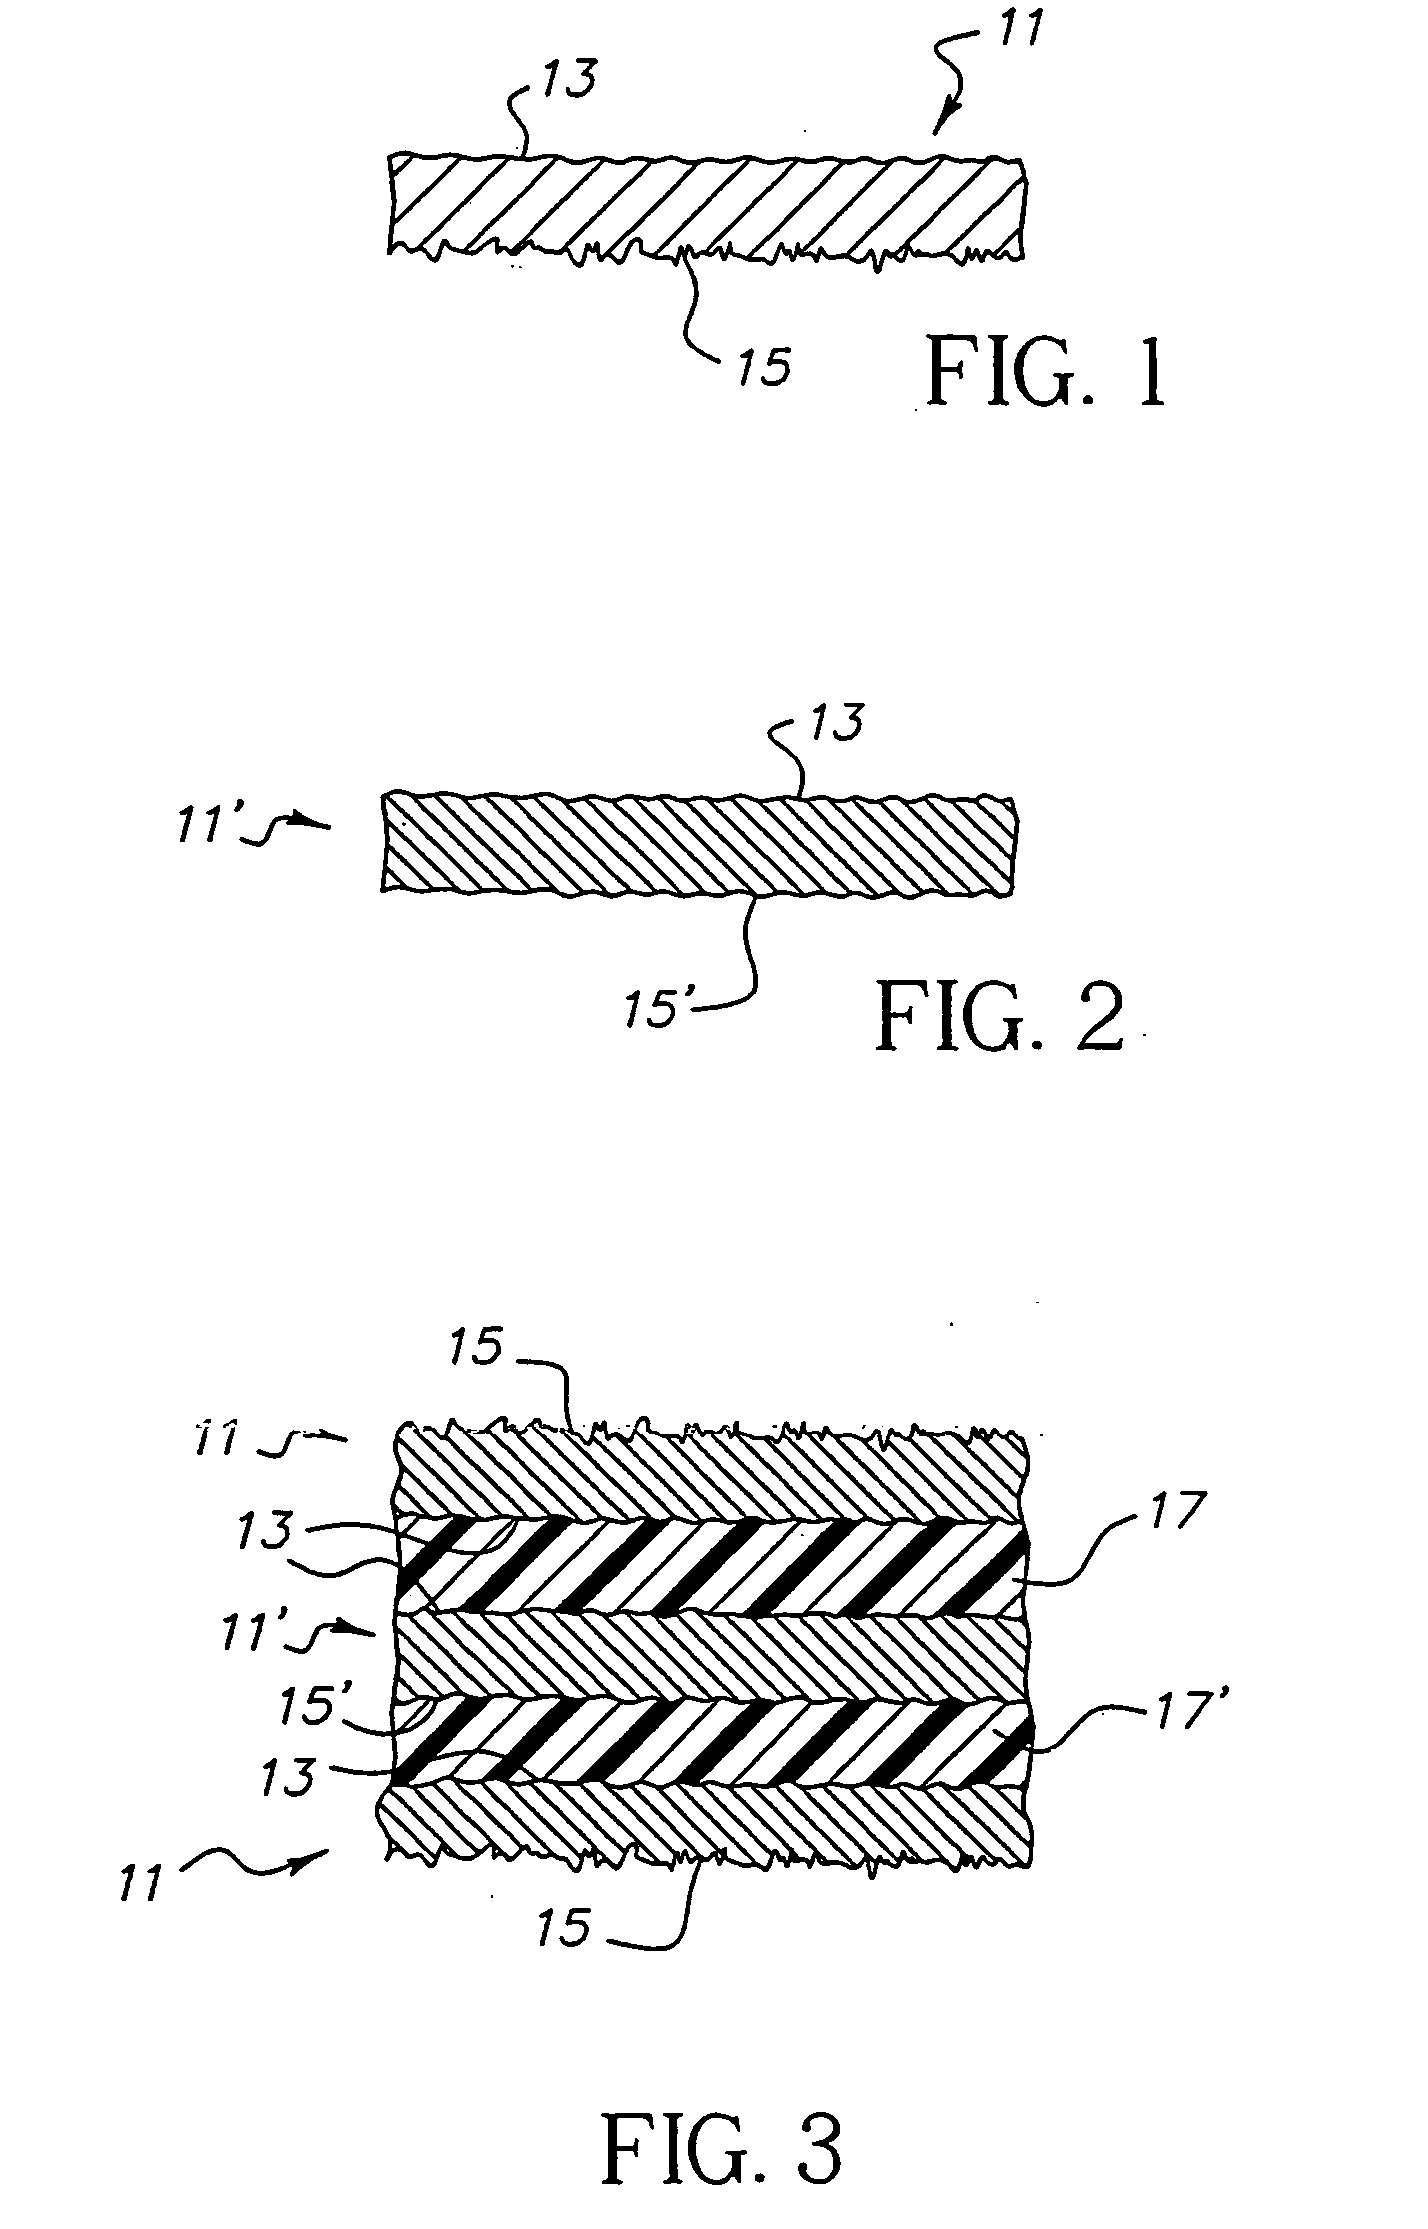 Circuitized substrate utilizing three smooth-sided conductive layers as part thereof and electrical assemblies and information handling systems utilizing same